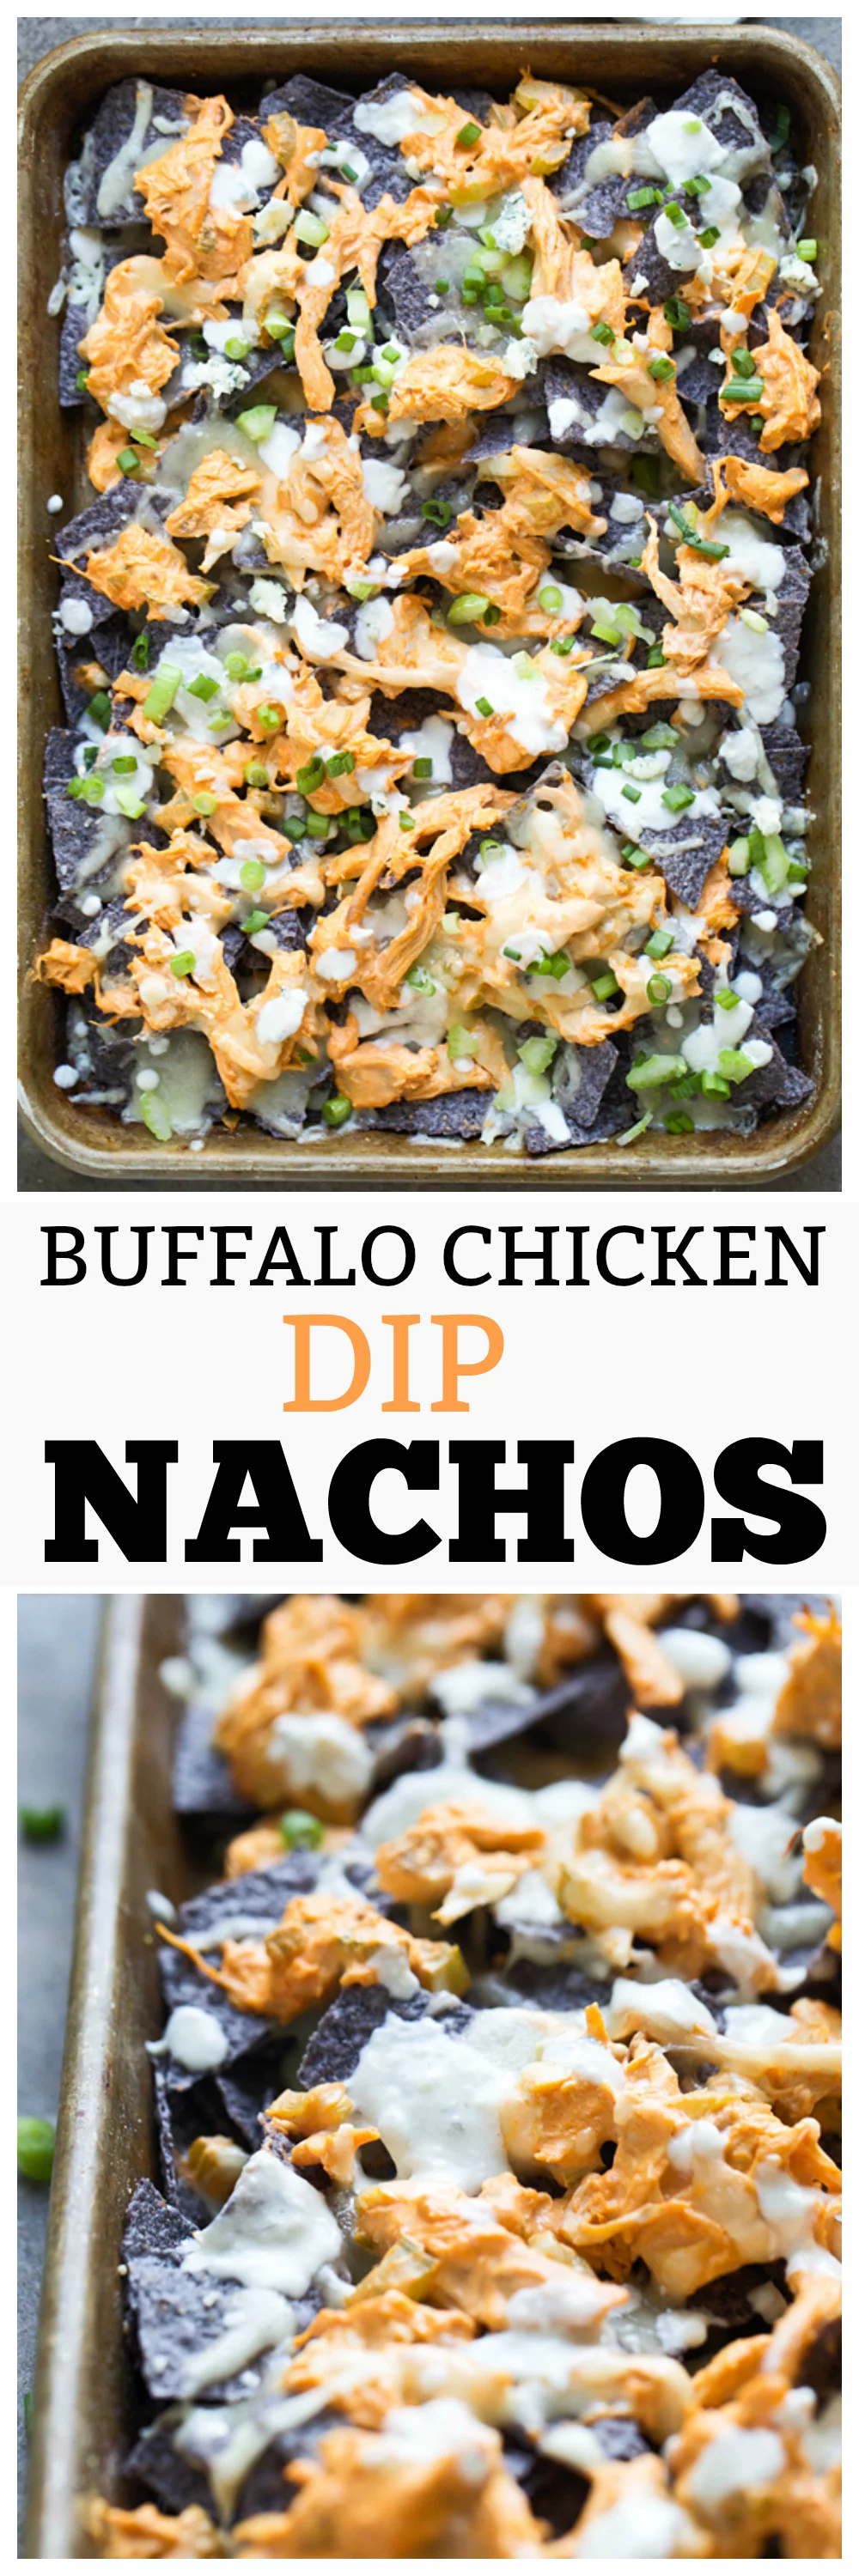 Buffalo Chicken Dip Nachos - Creamy buffalo chicken dip smothered over tortilla cheese, covered with cheese and then drizzled with blue cheese sauce. Heaven!